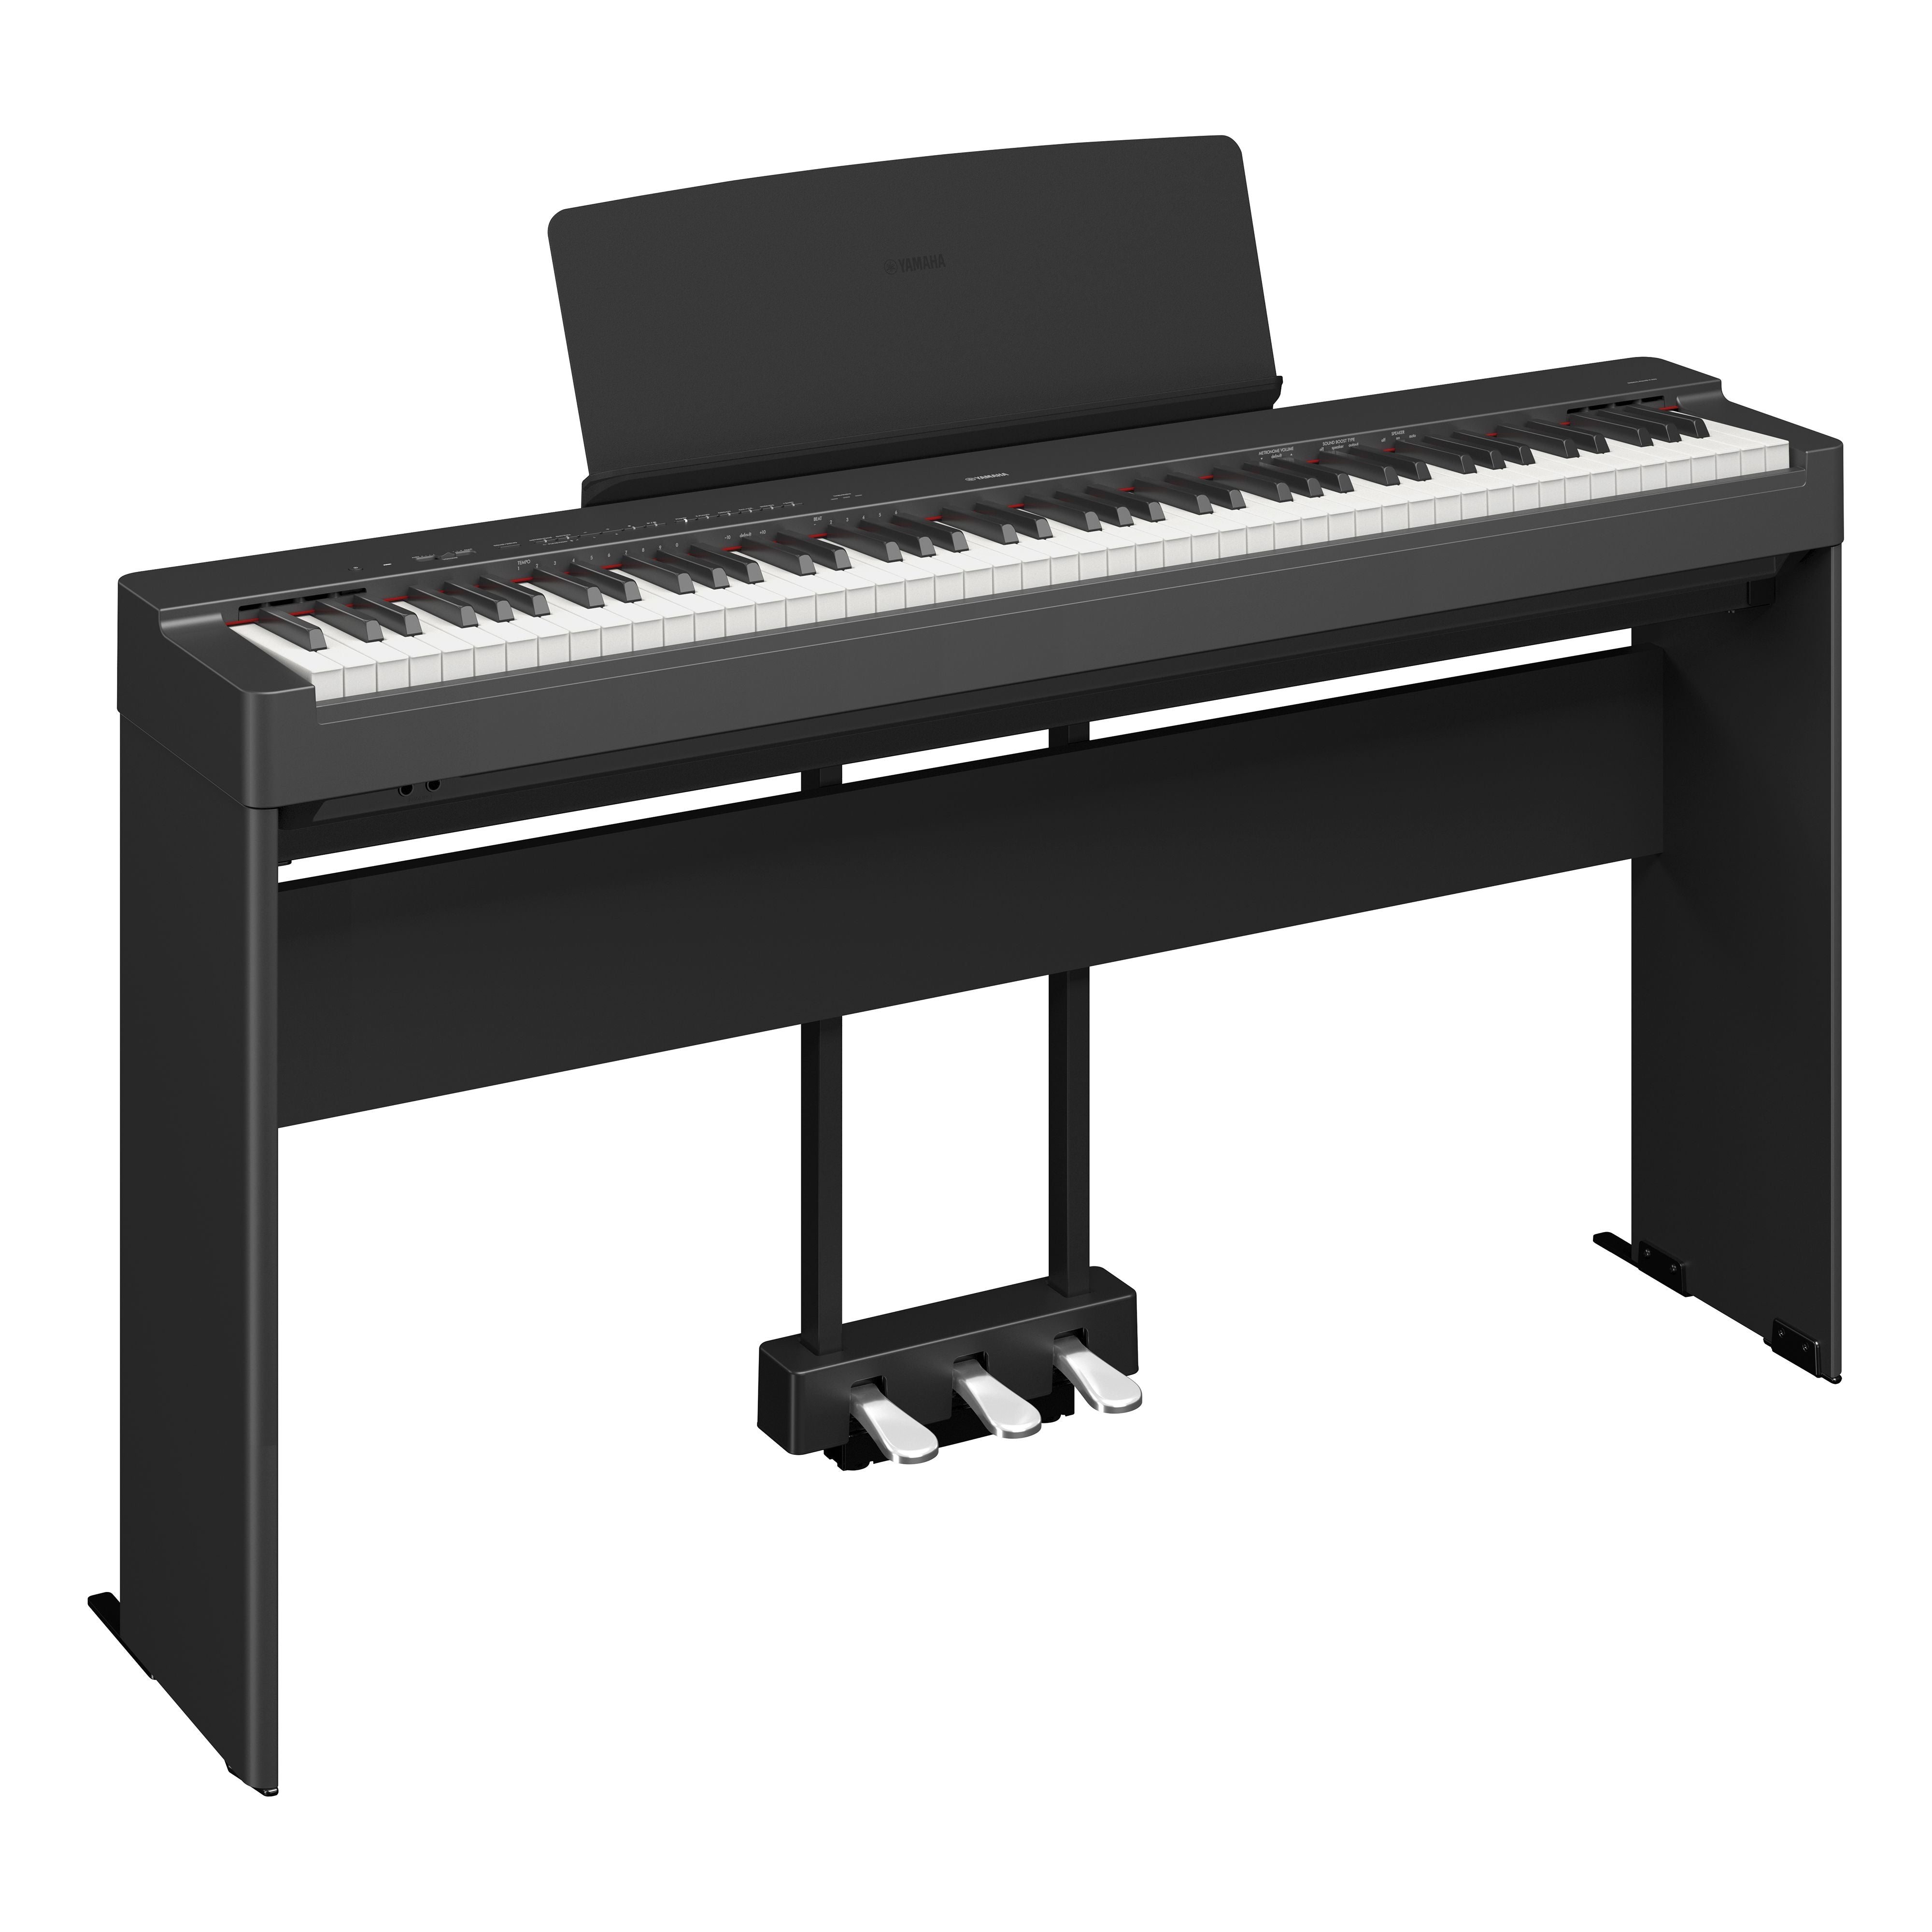 [*3 Years Warranty] Yamaha P-225 Digital Piano (with Pedal And Free Headphones, AC Adaptor) New Model 2023